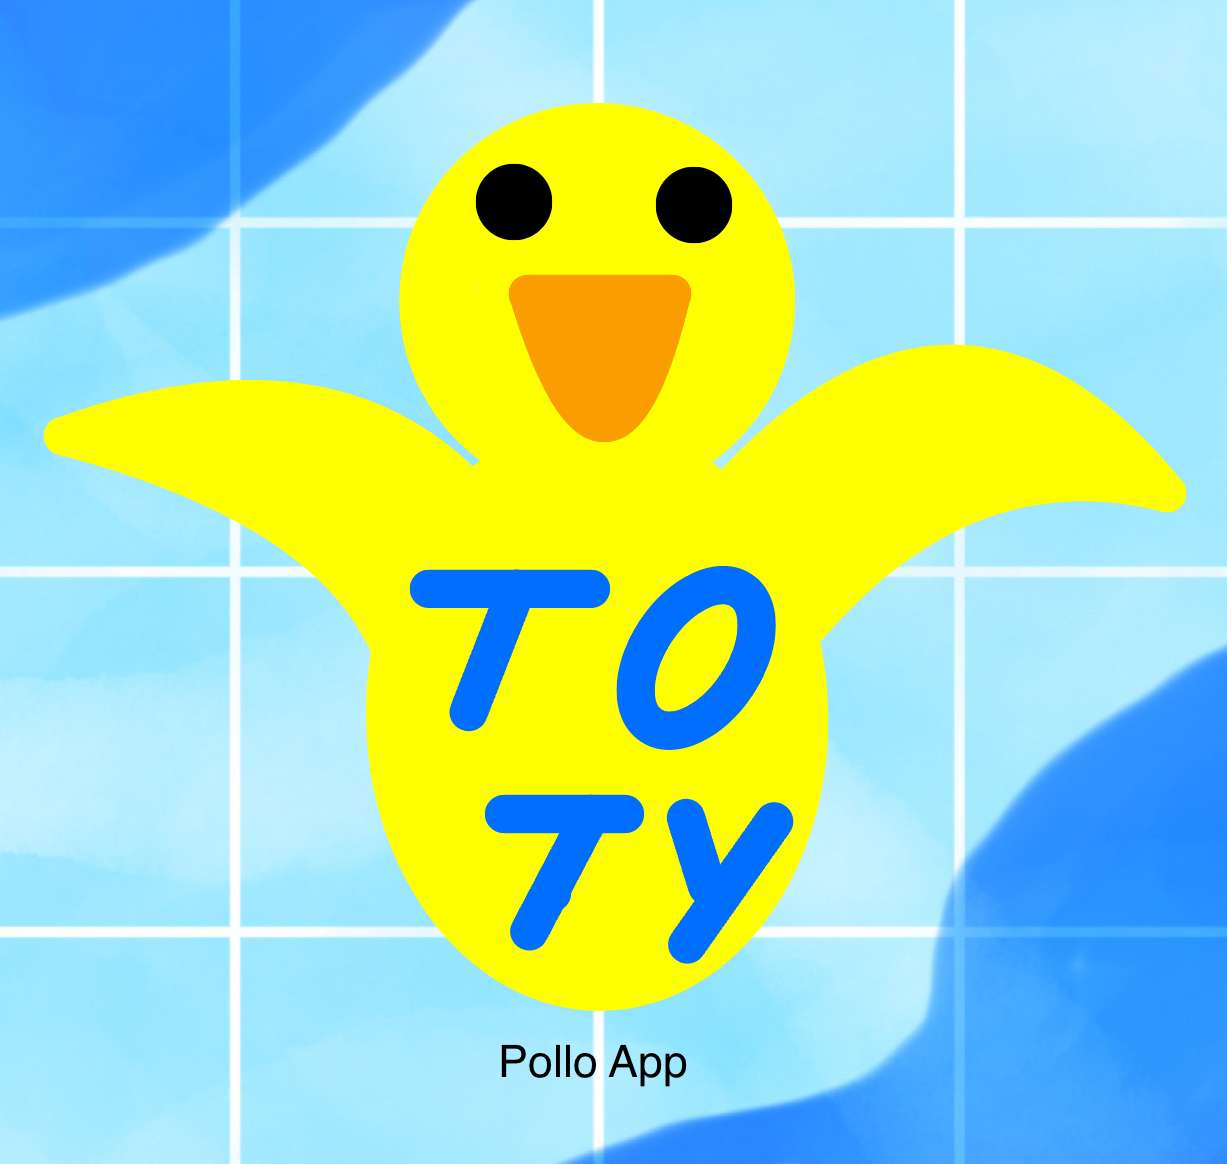 Pollito App puzzle online from photo